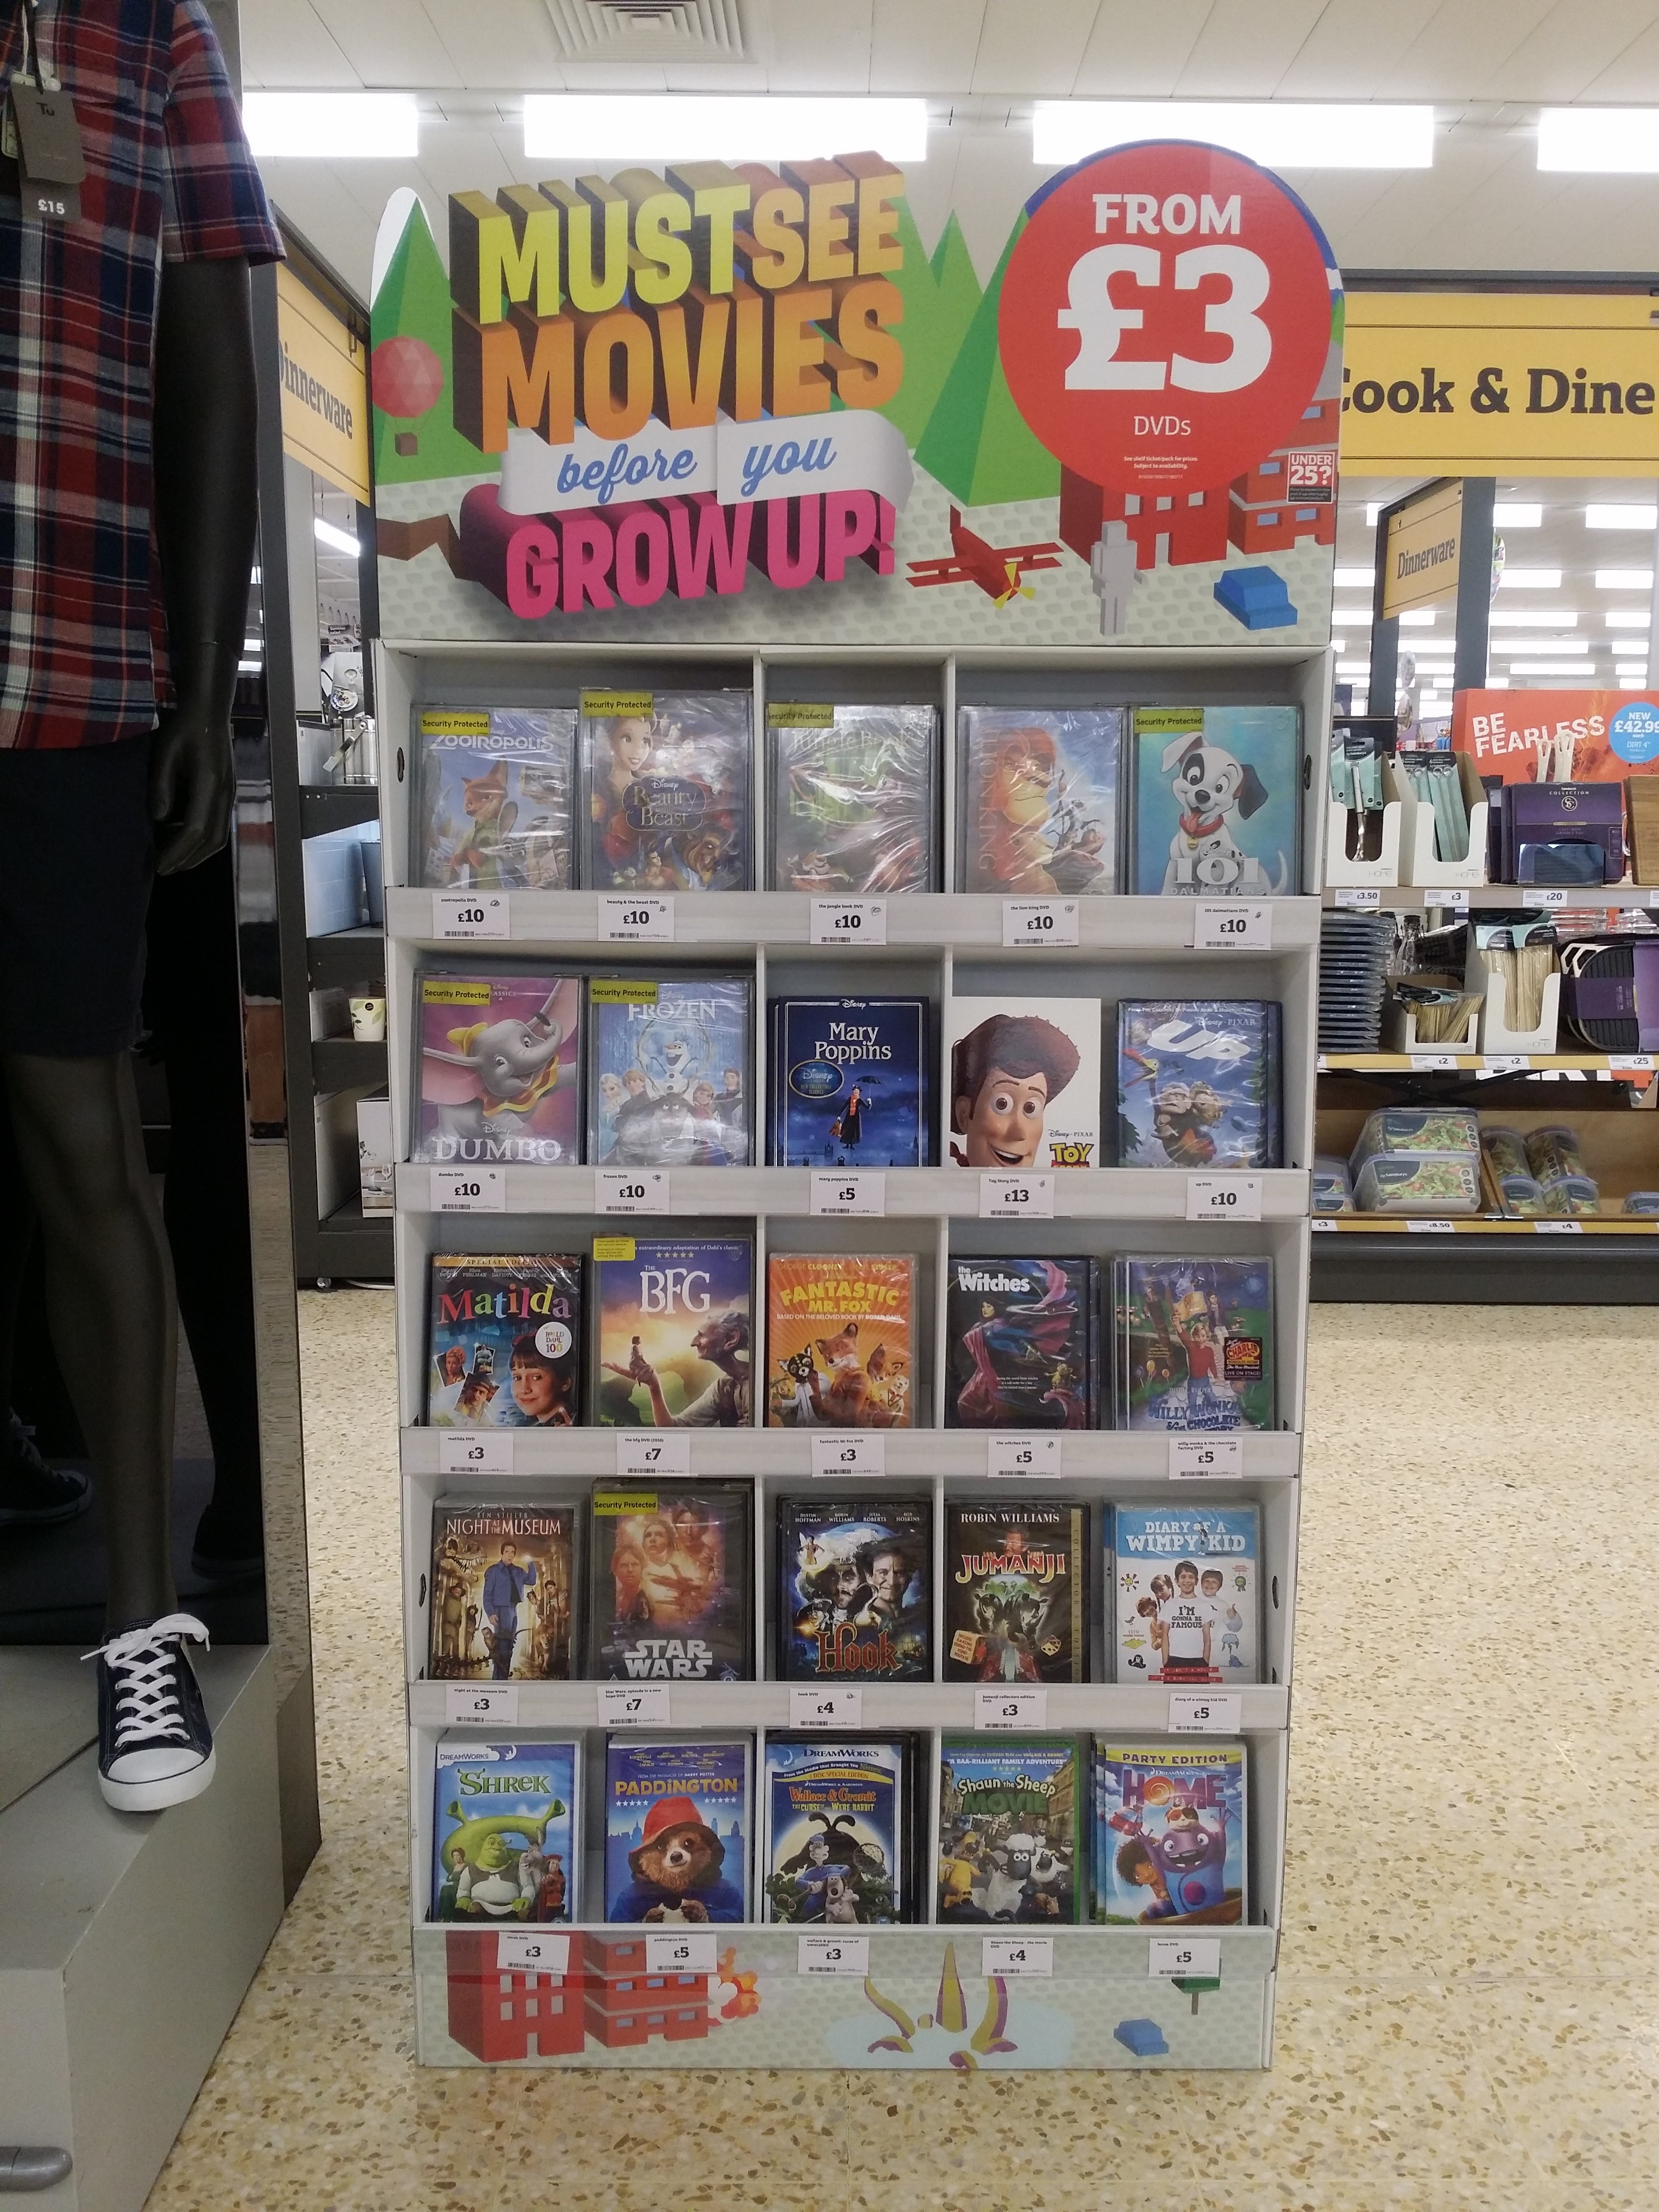 Must See Movies campaign, driving physical sales at retail